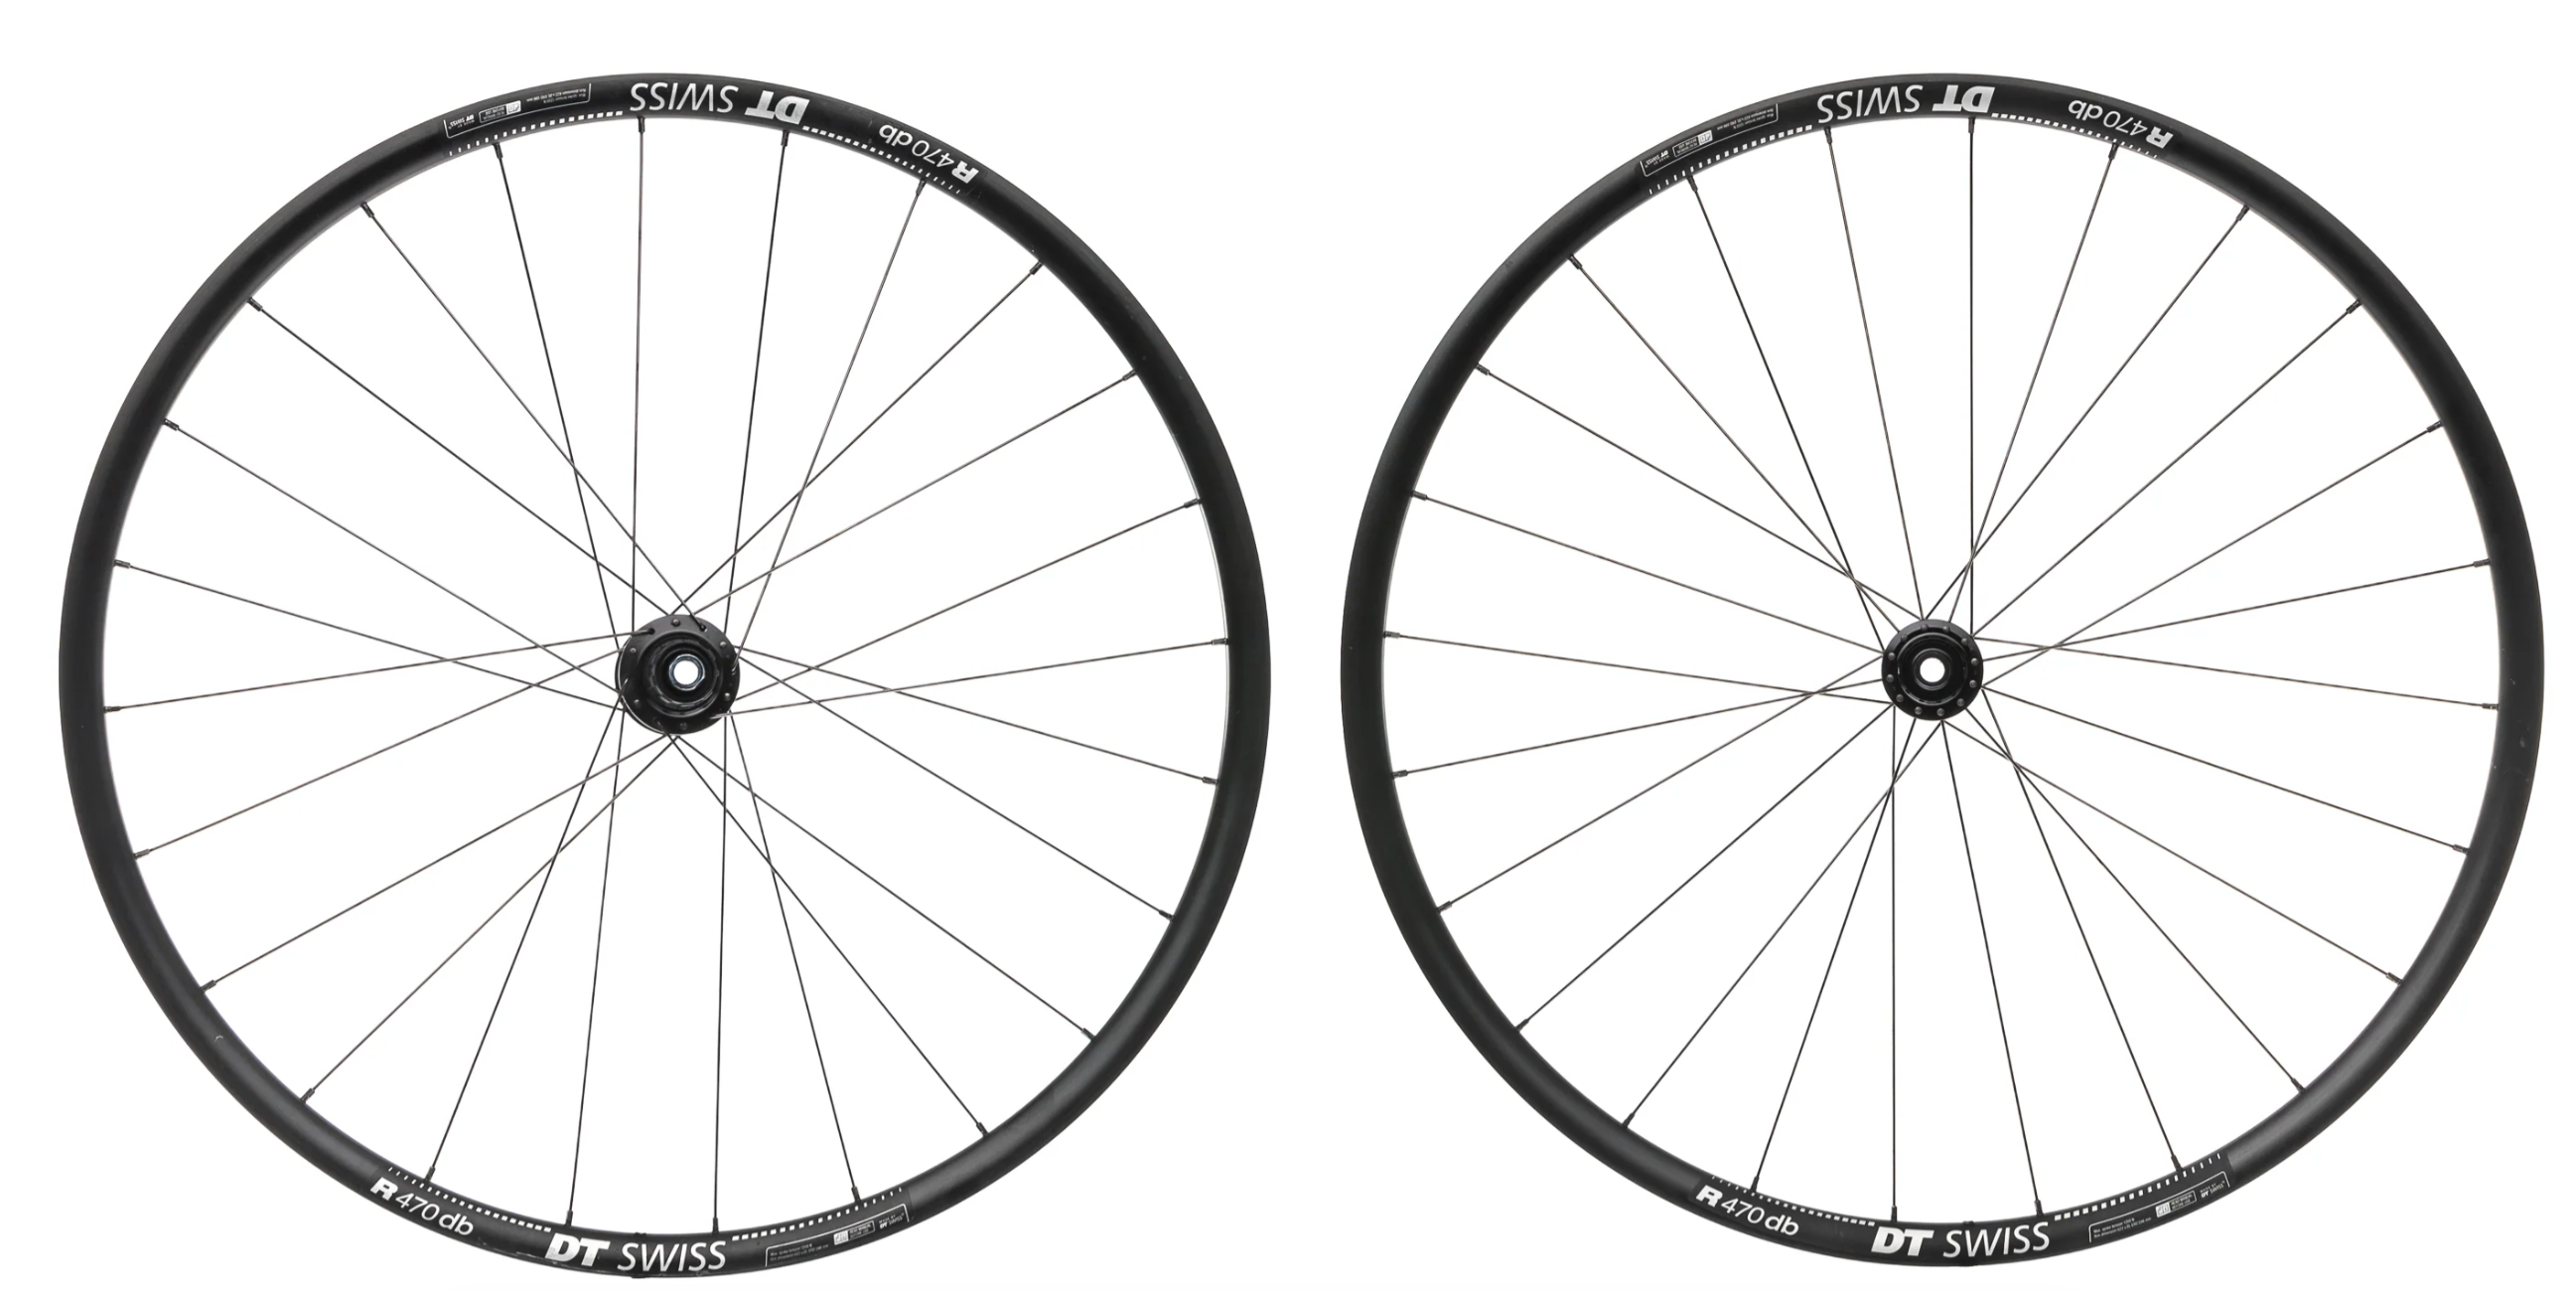 DT Swiss R 470 Wheelsets - Weight, Review, Specs, Price | Rims 